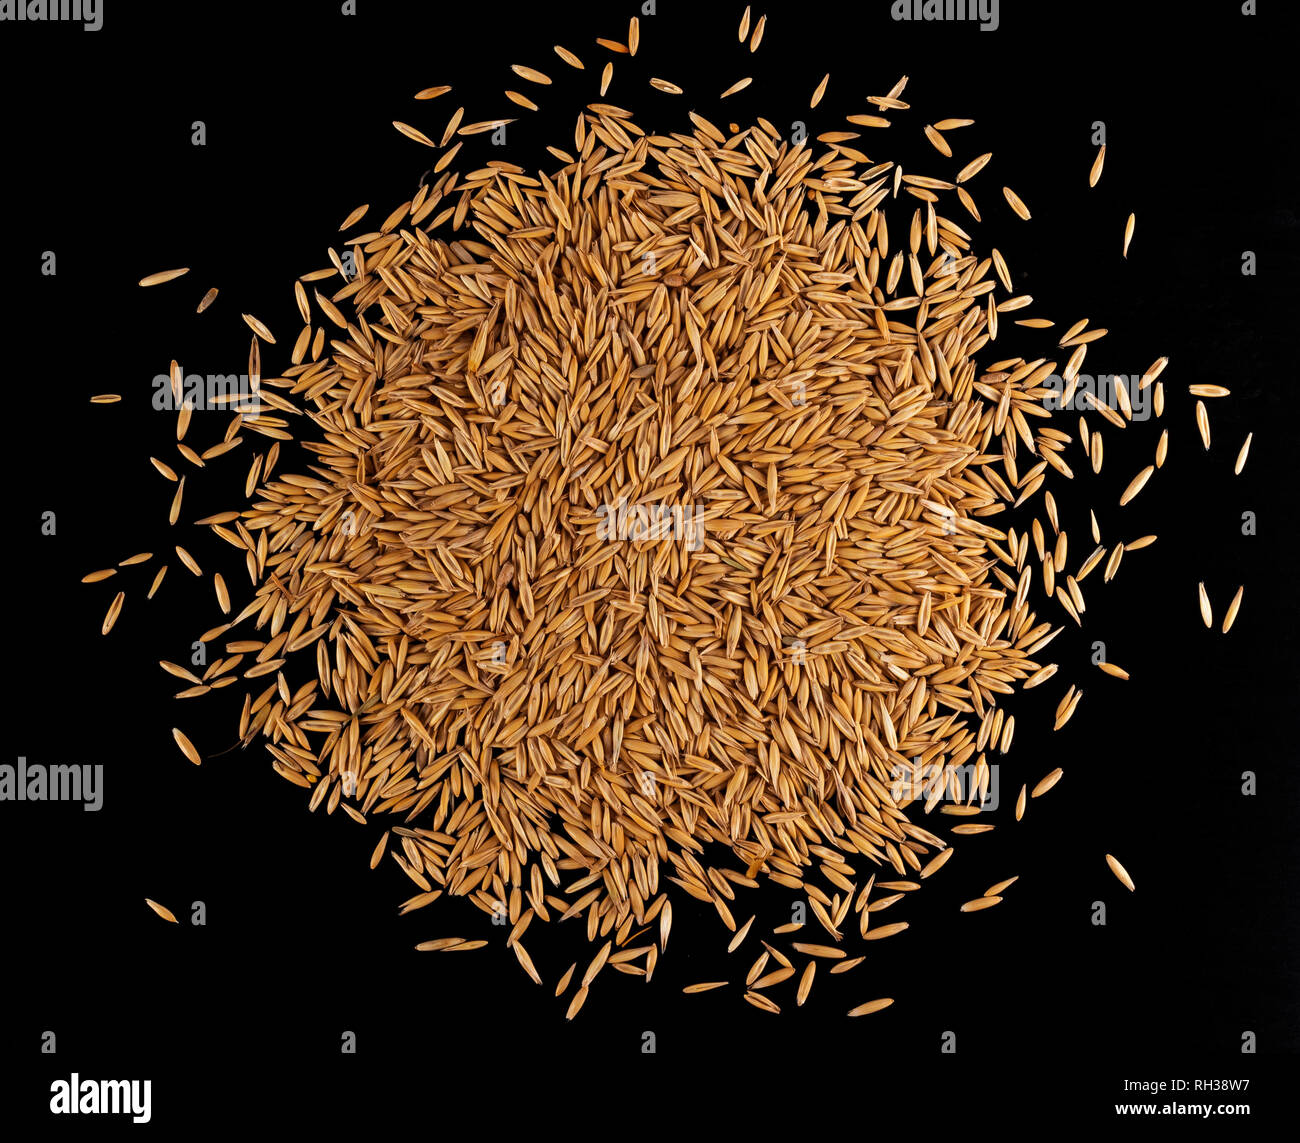 Pile of oat seeds on black background, top view Stock Photo